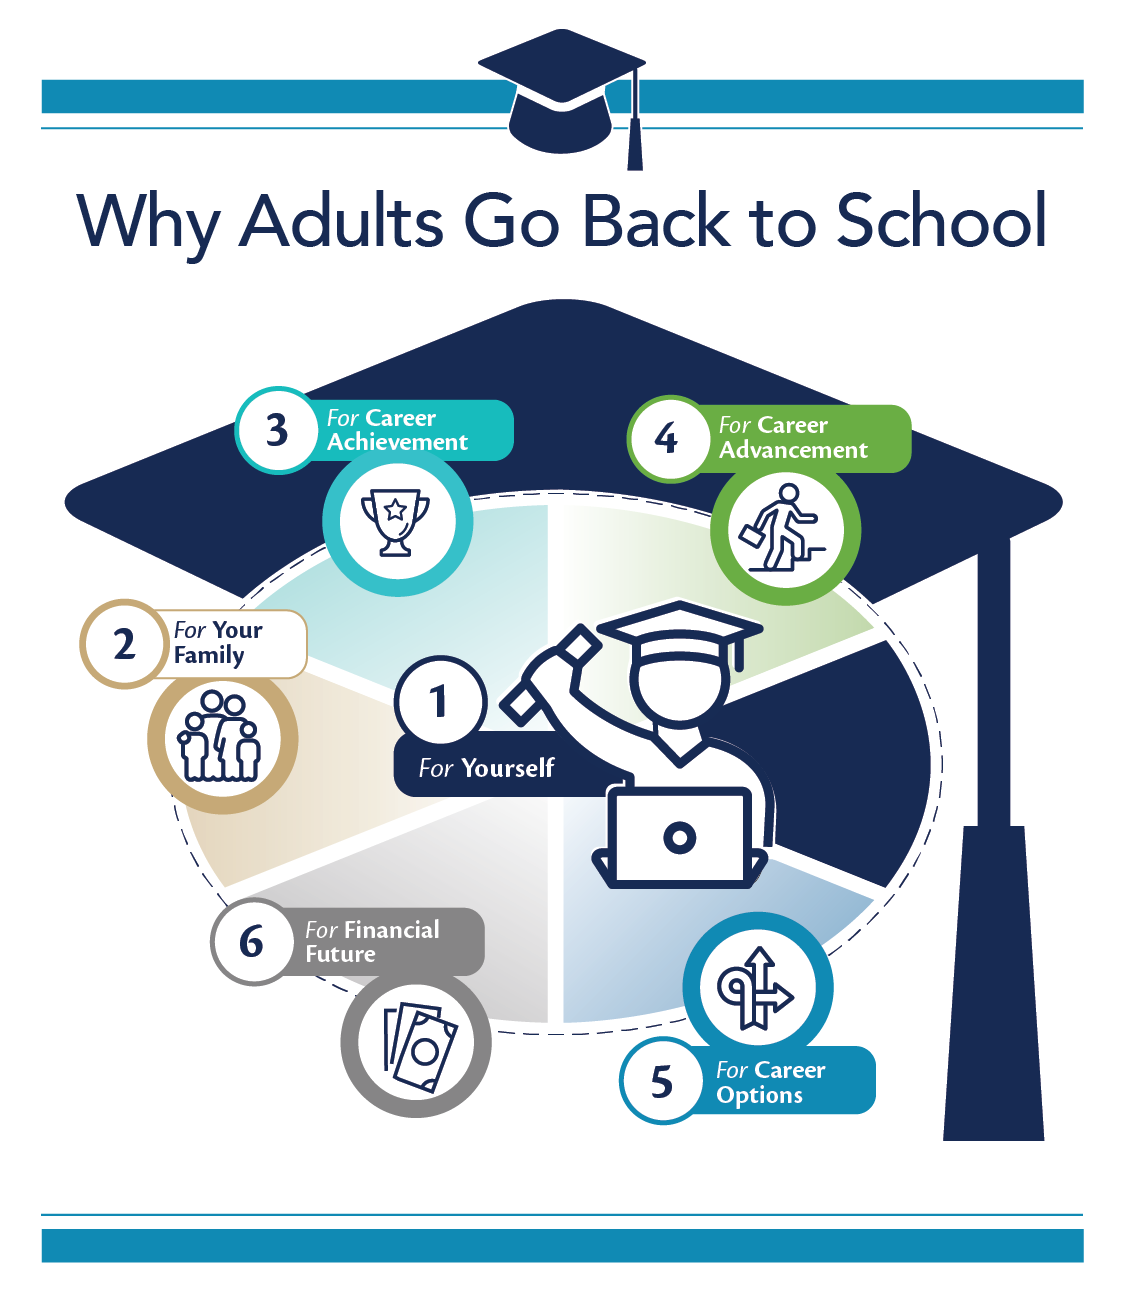 Infographic listing reasons why adults go back to school